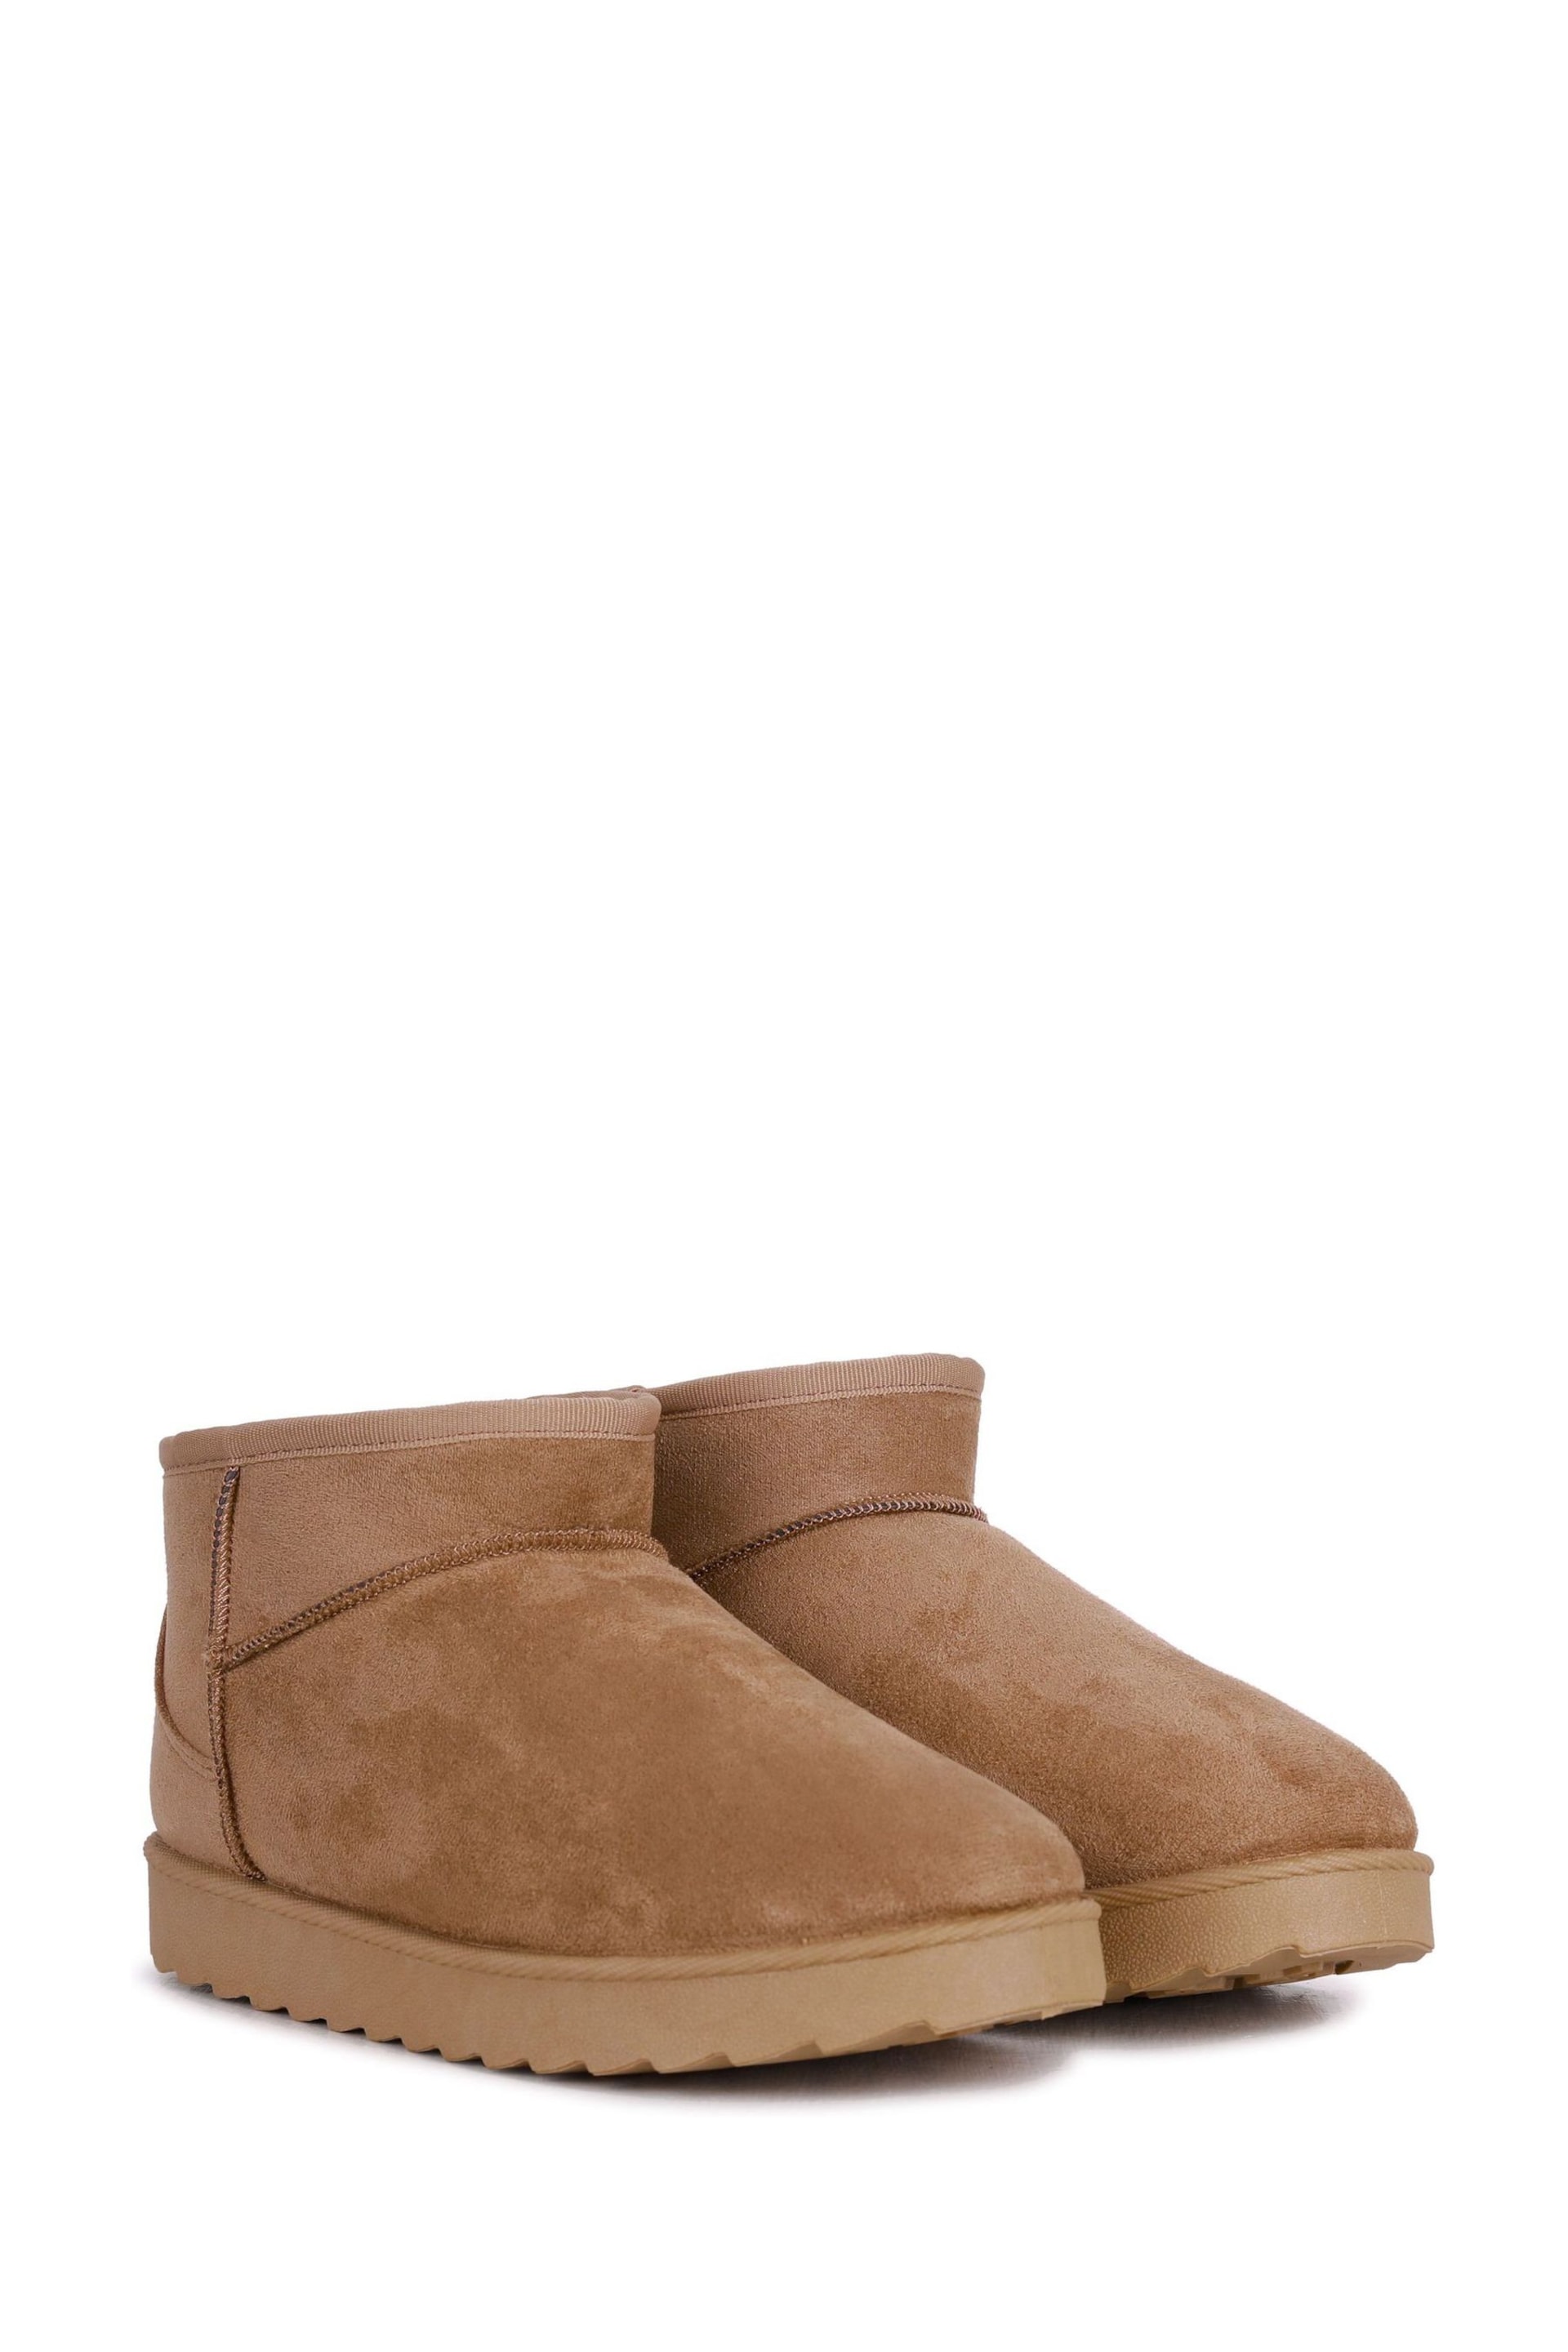 Linzi Brown Mini Addy Faux Suede Faux Fur Lined Ankle Boots - Image 3 of 4